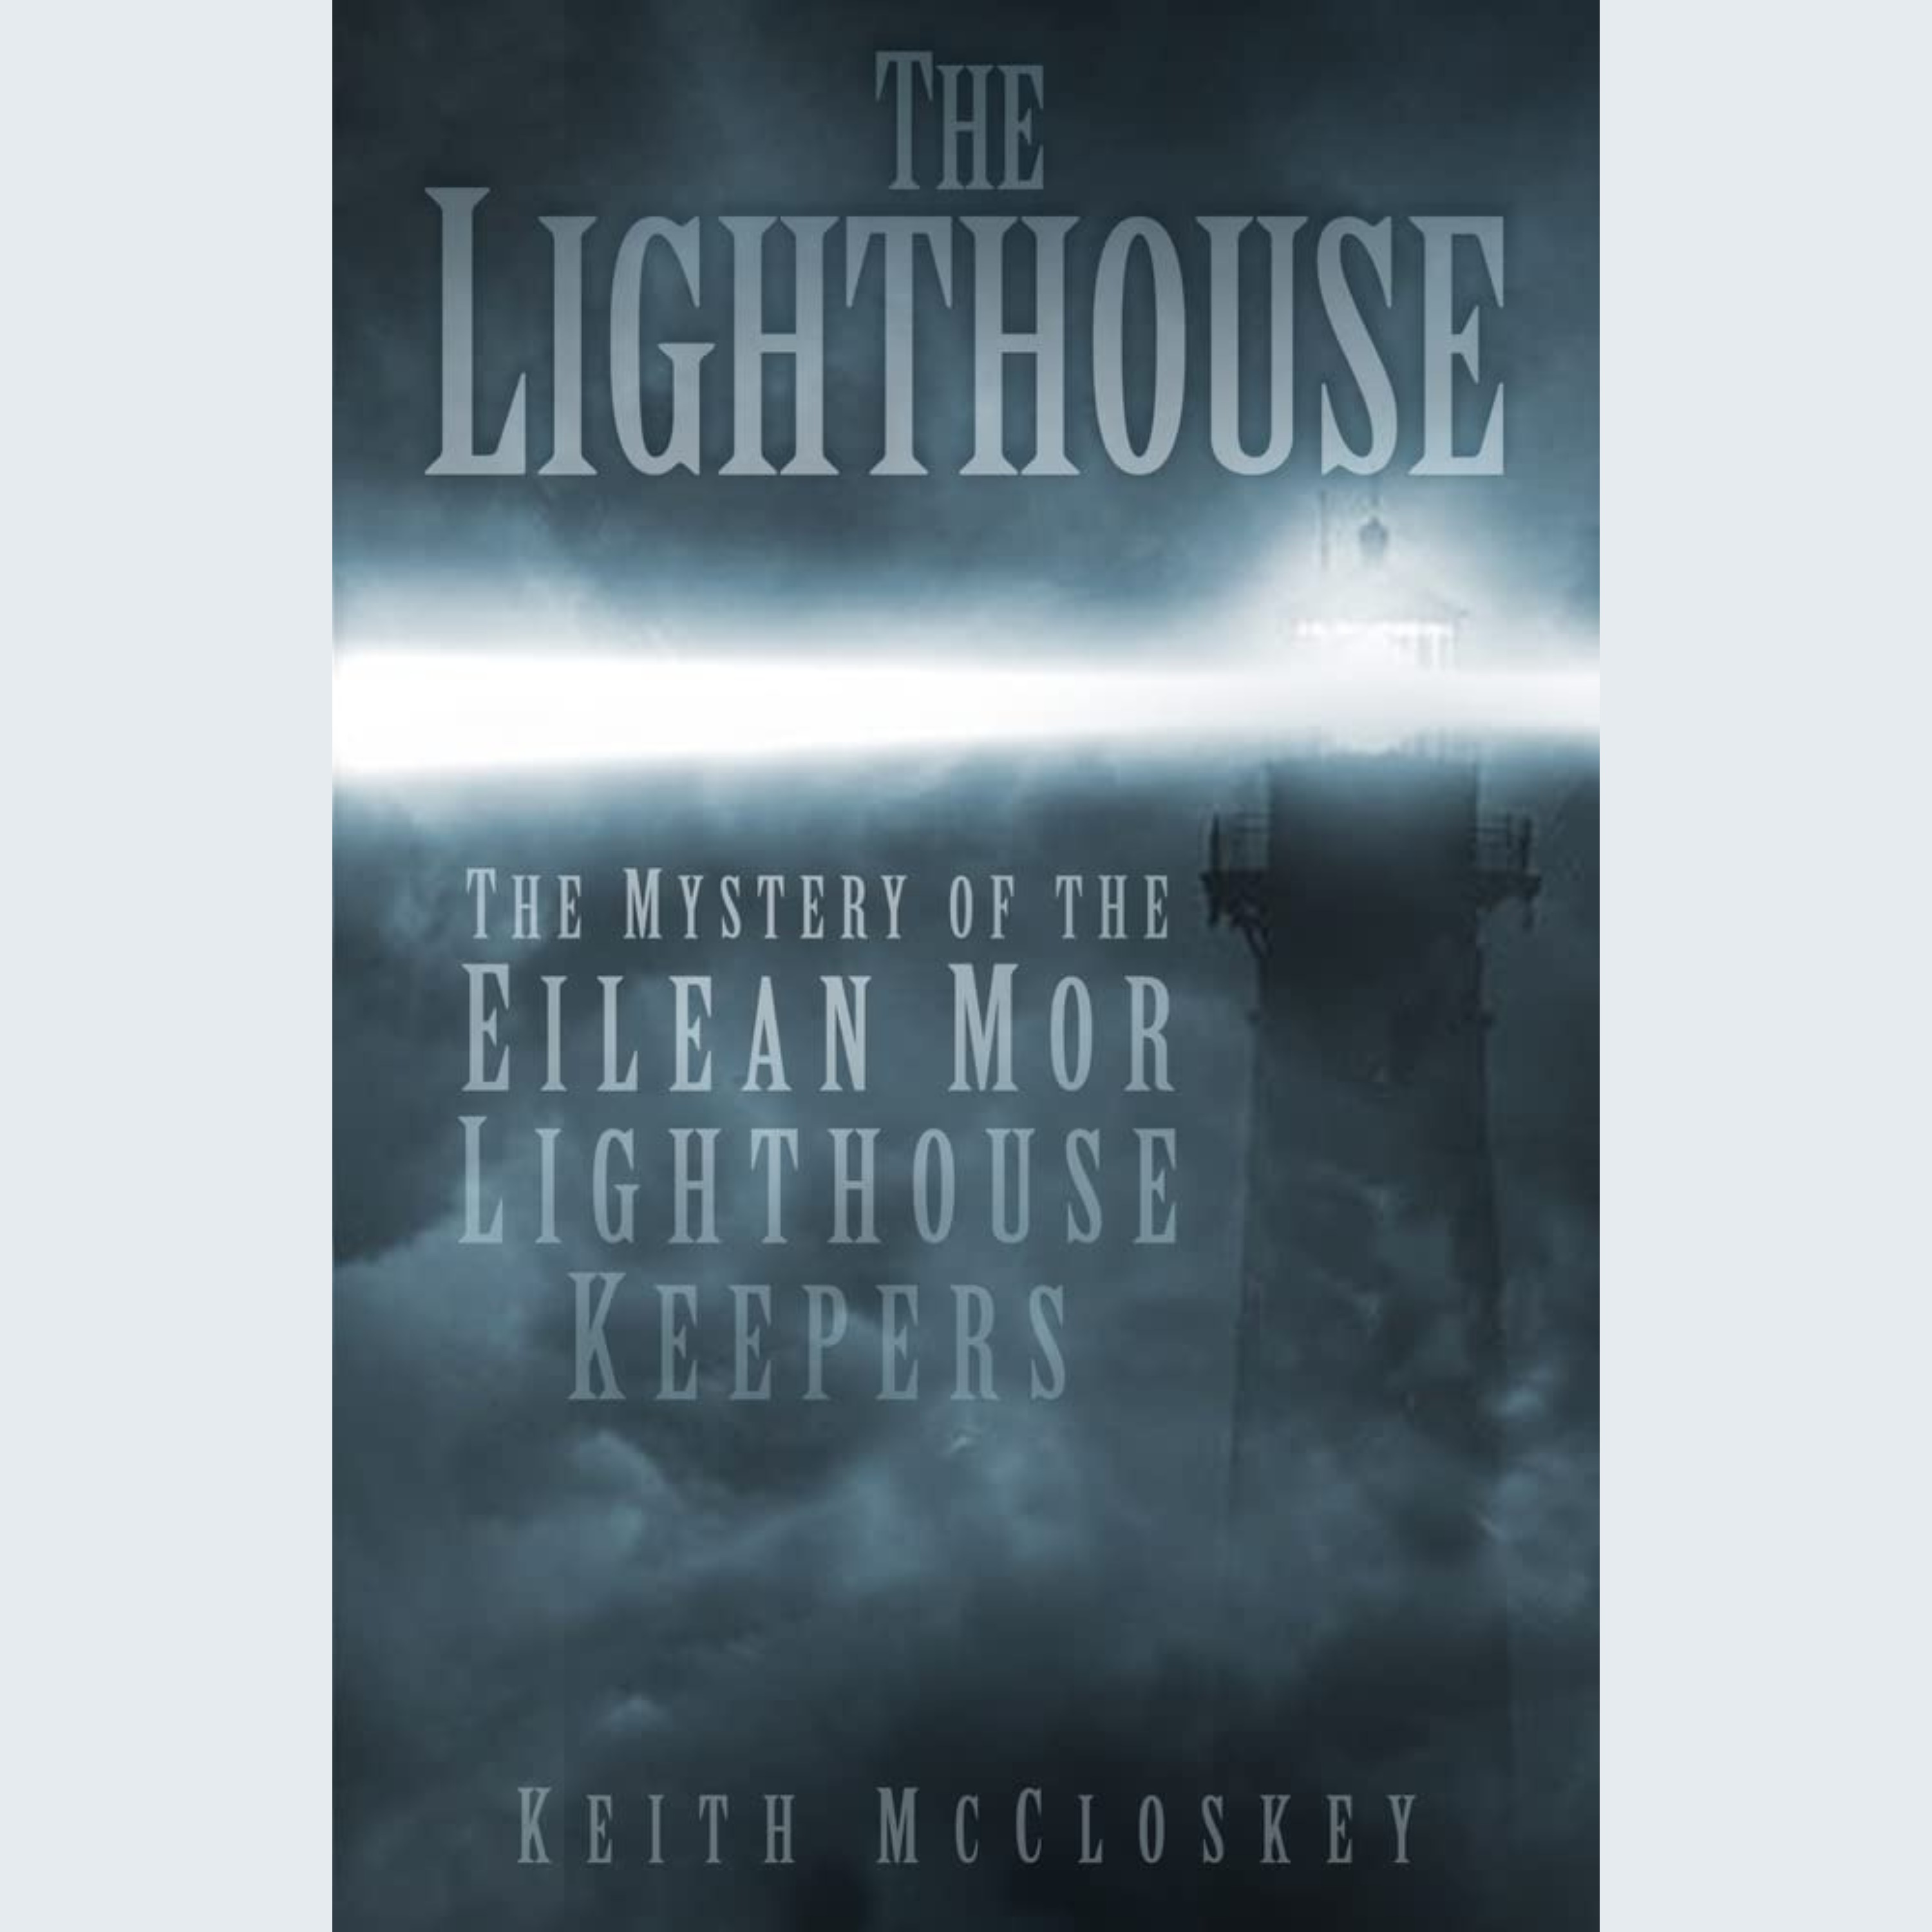 UNEXPLAINED: The Missing Lighthouse Keepers of Eilean Mor